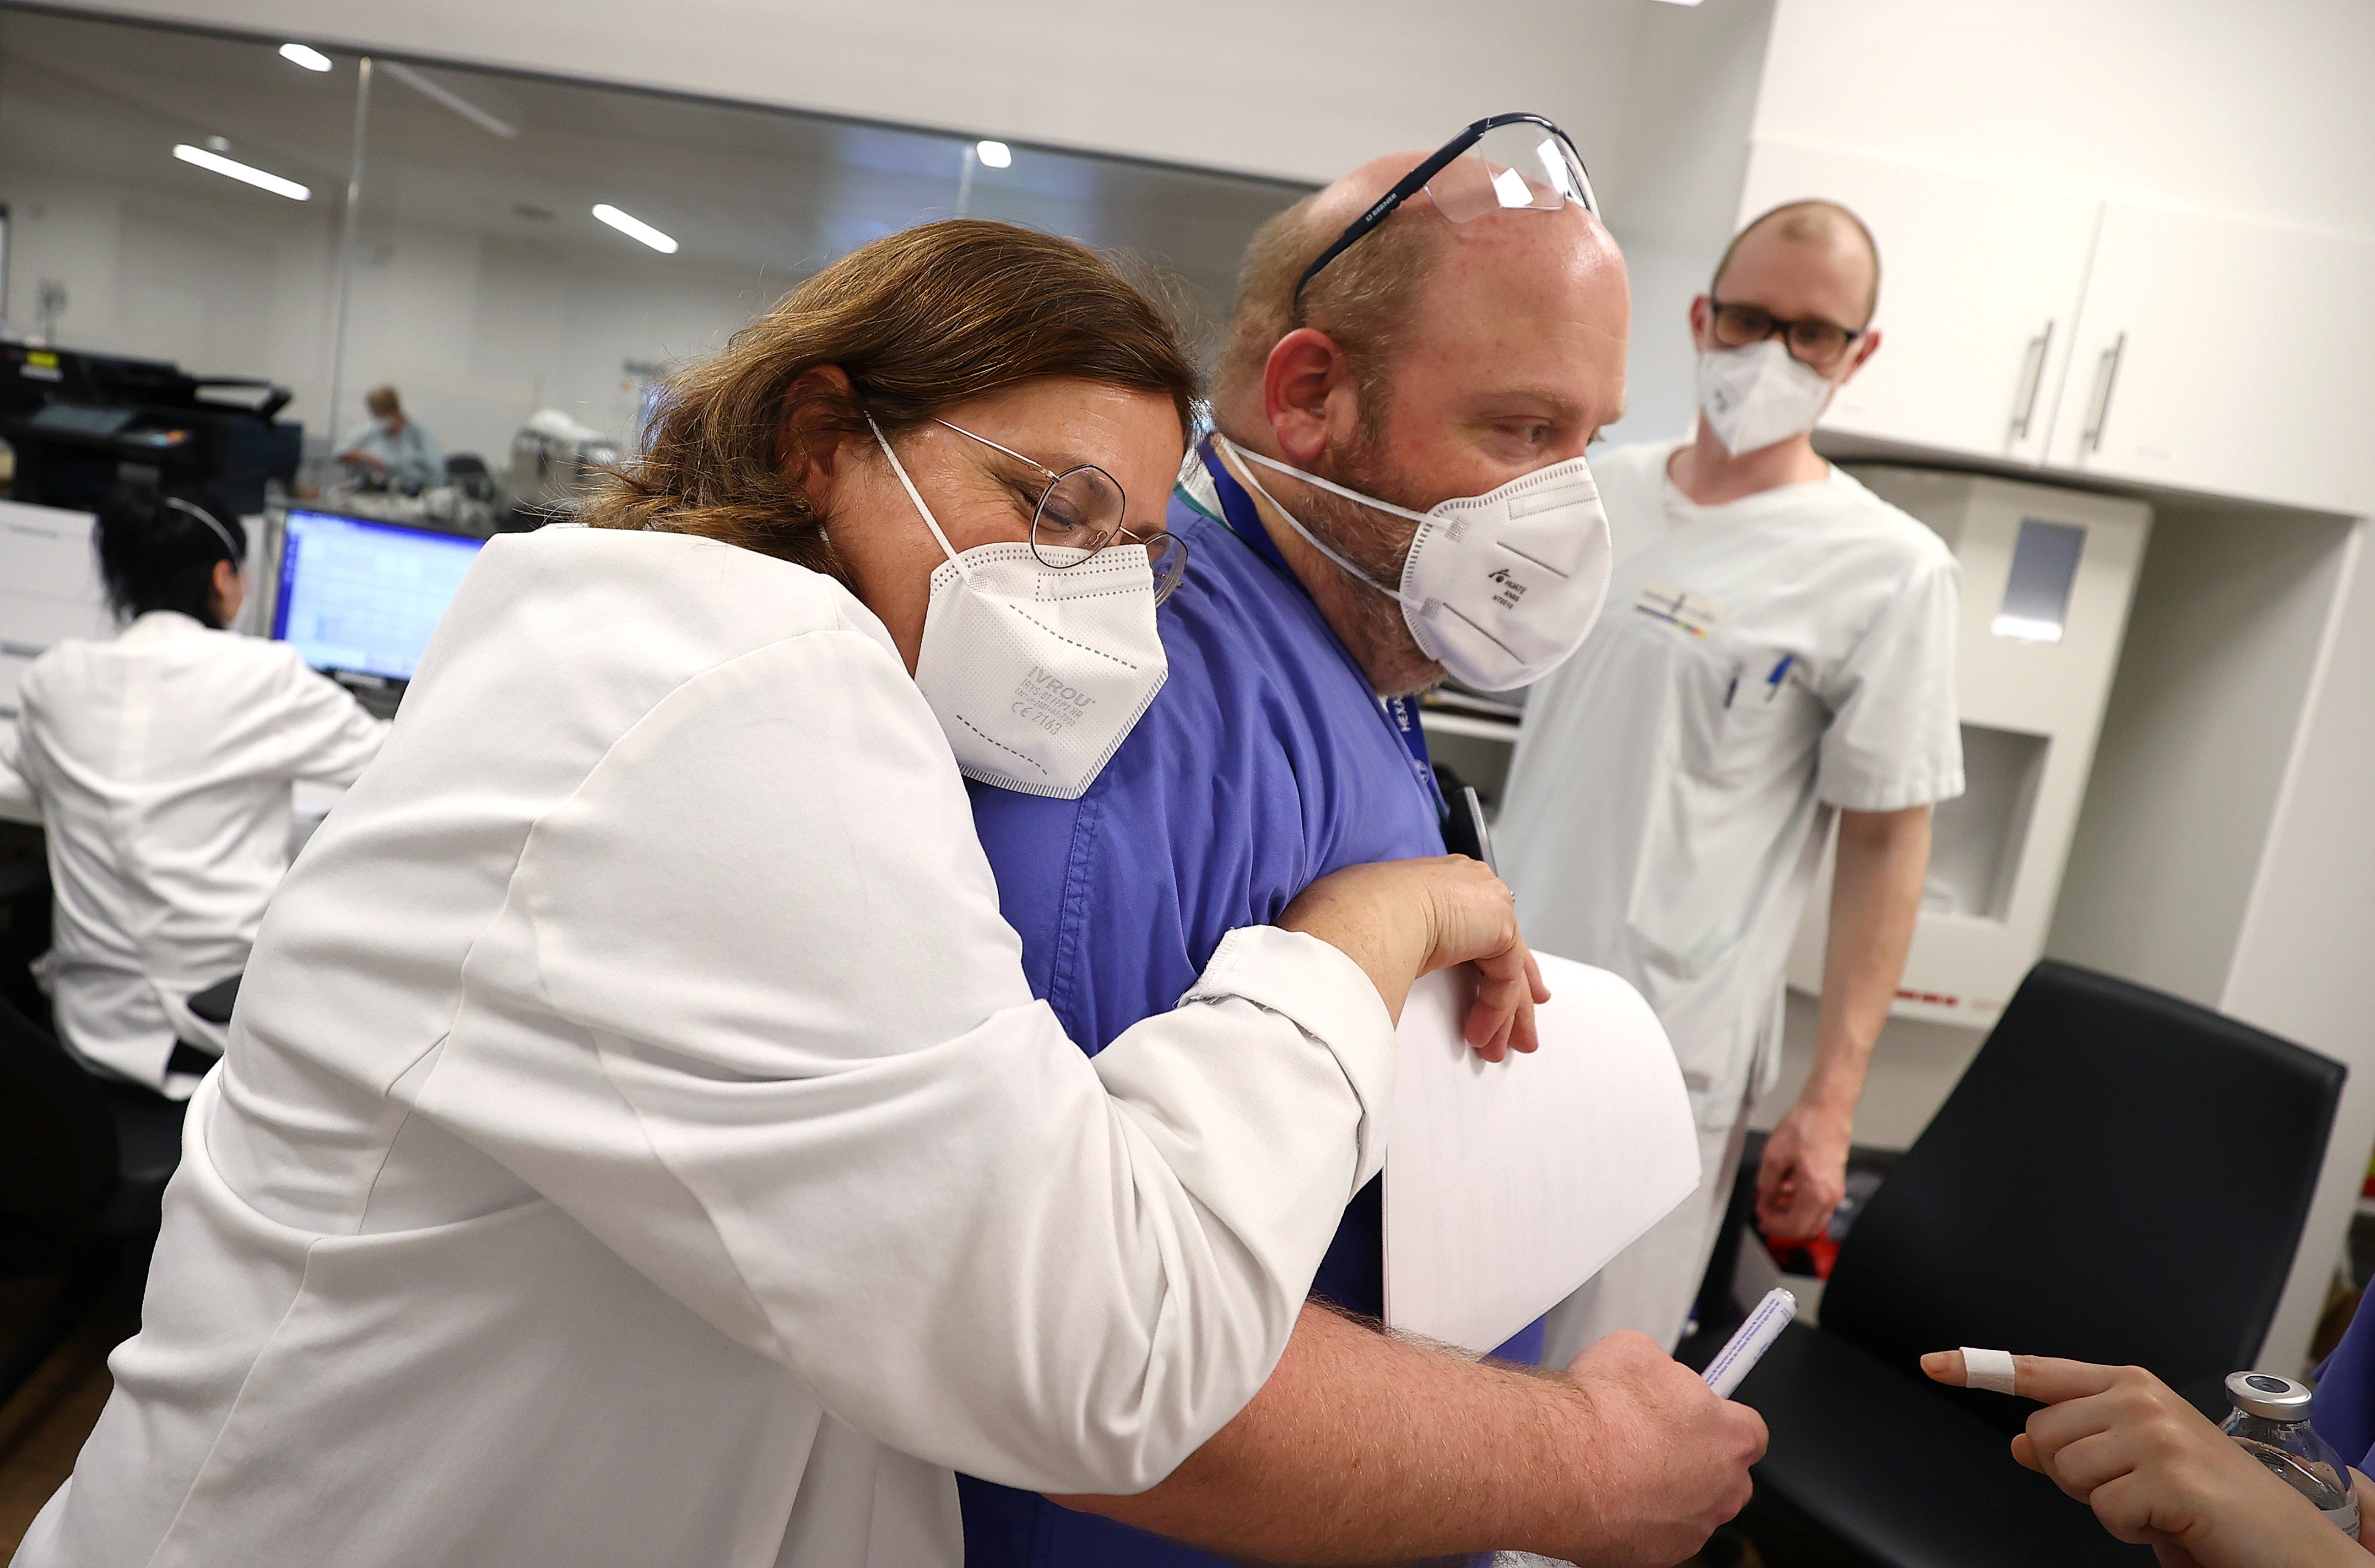 Doctor Christine Hidas (L), head of the emergency department, embraces a colleague during a busy shift as the spread of the coronavirus disease (COVID-19) continues, at a clinic in Darmstadt, Germany